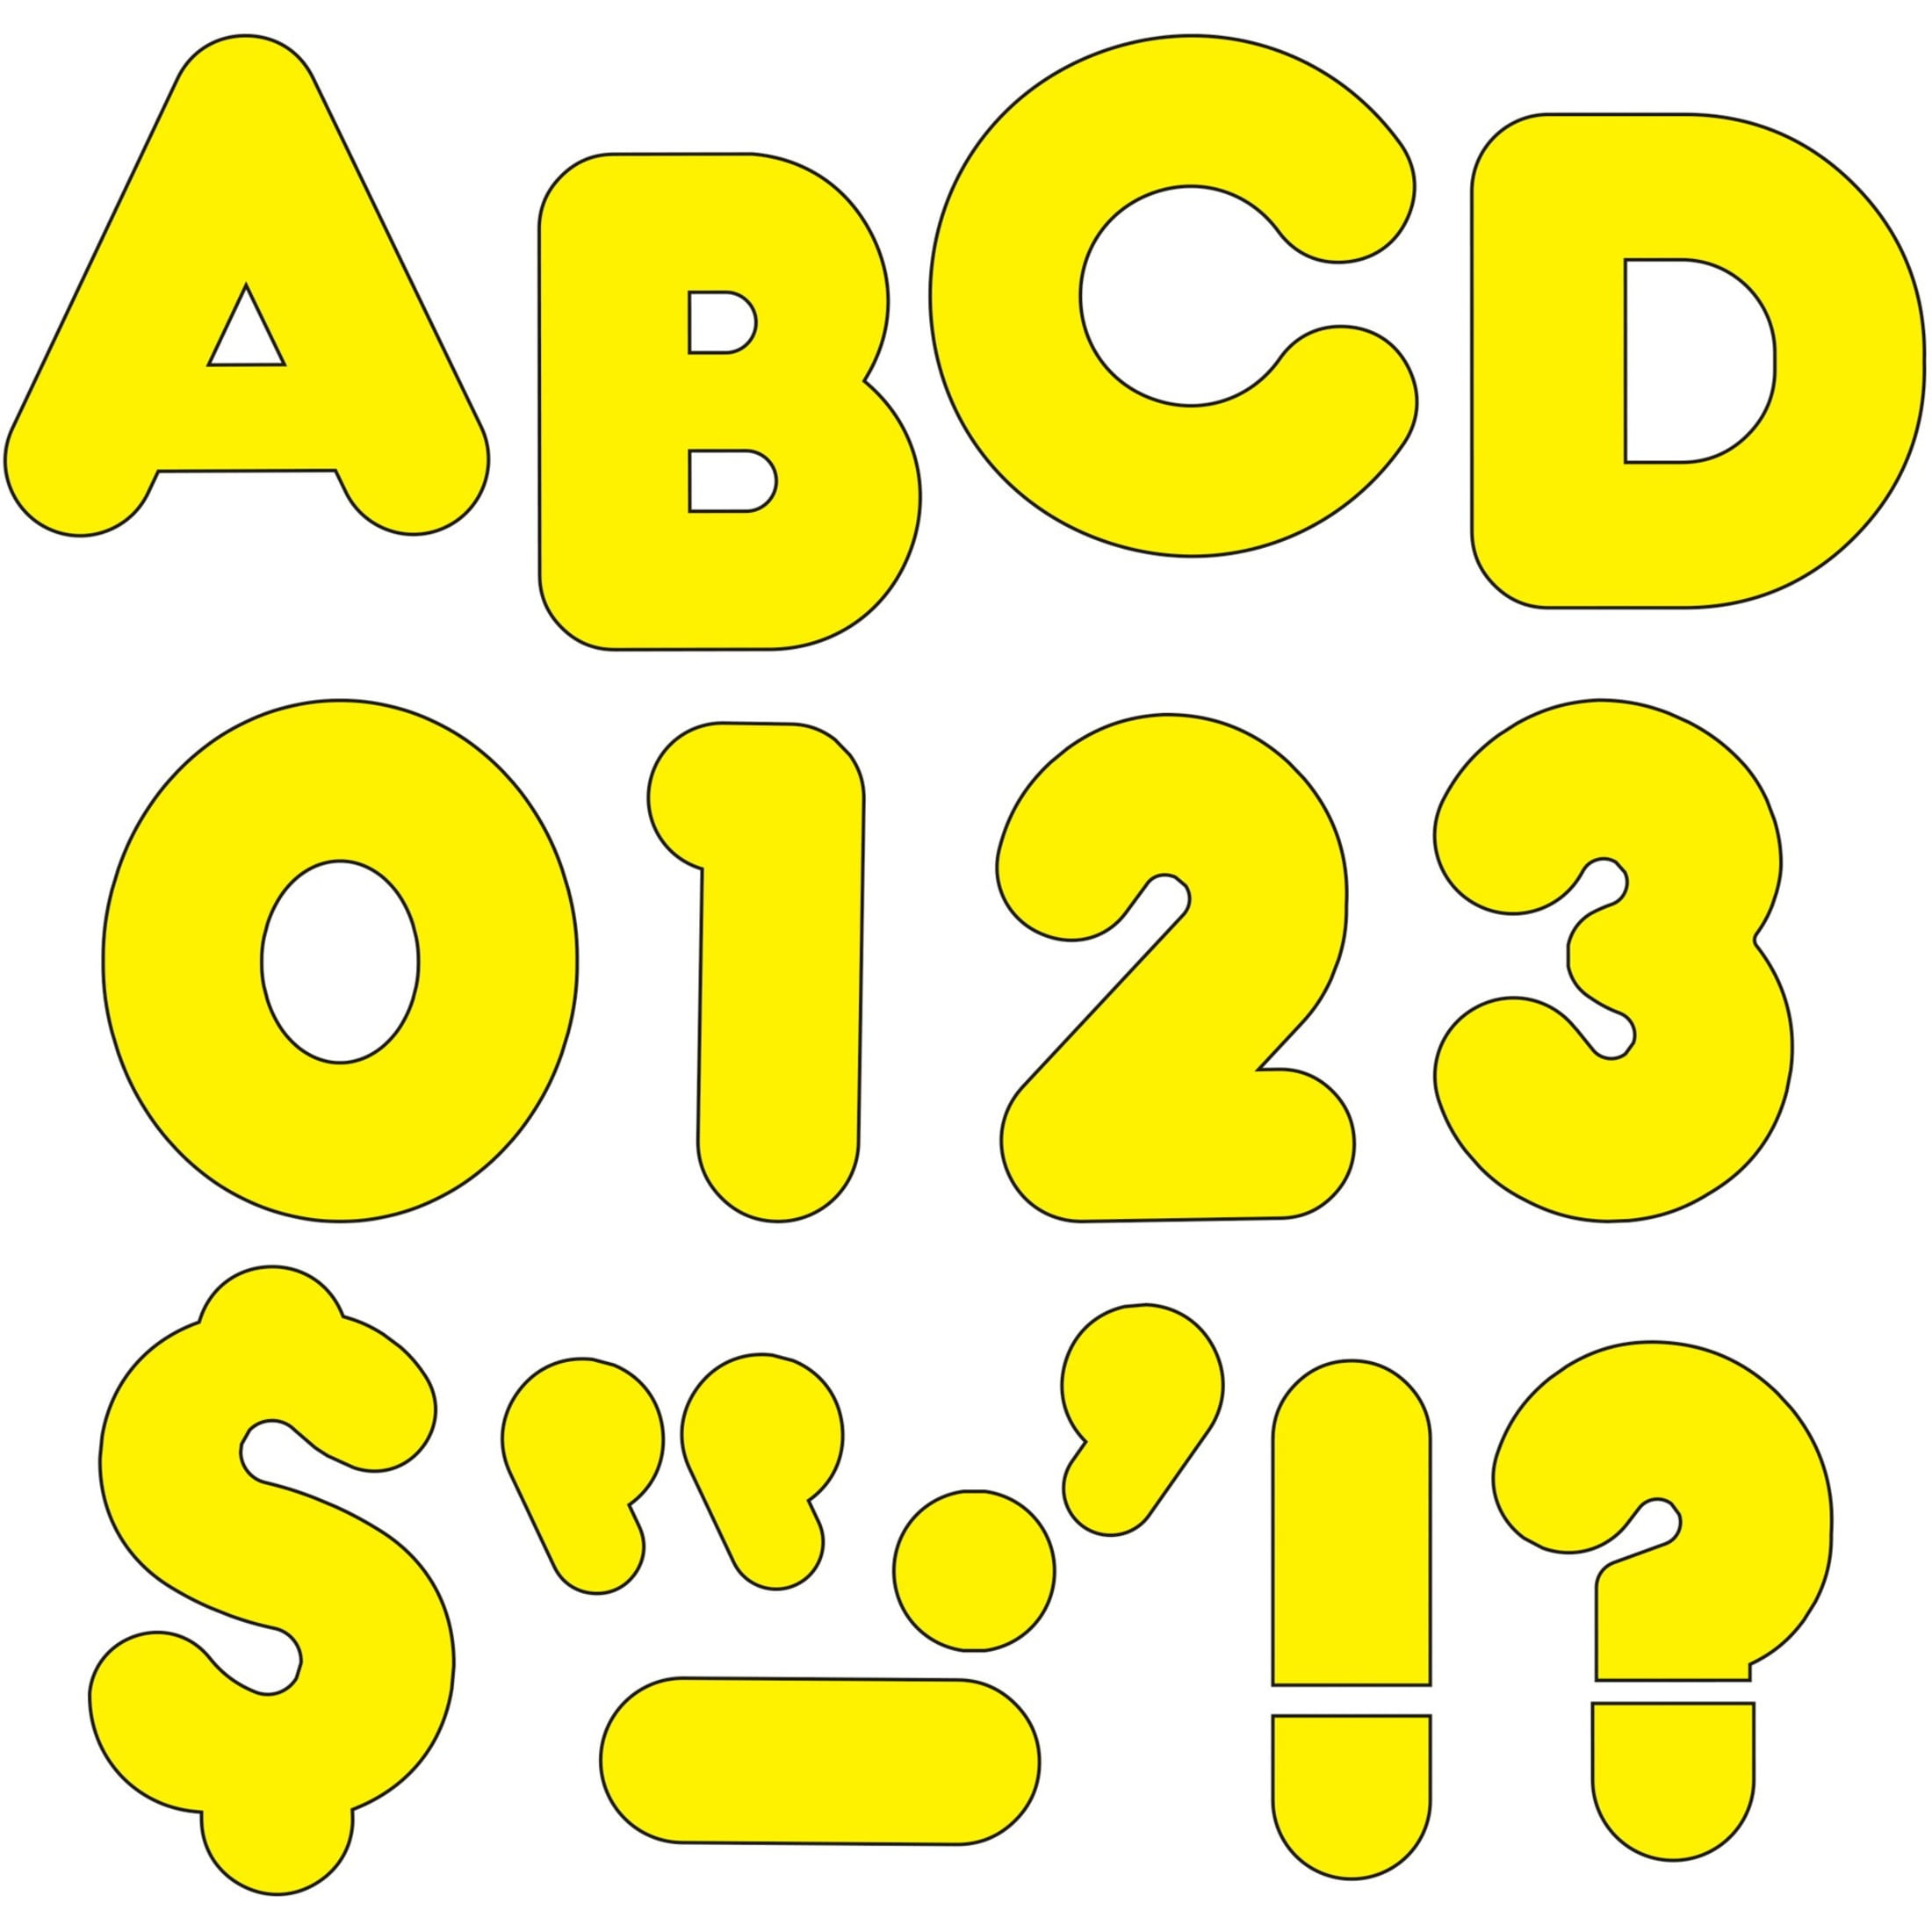 Sticko Solid x-Large Black Poster Paper Alphabet Stickers, 99 Pieces